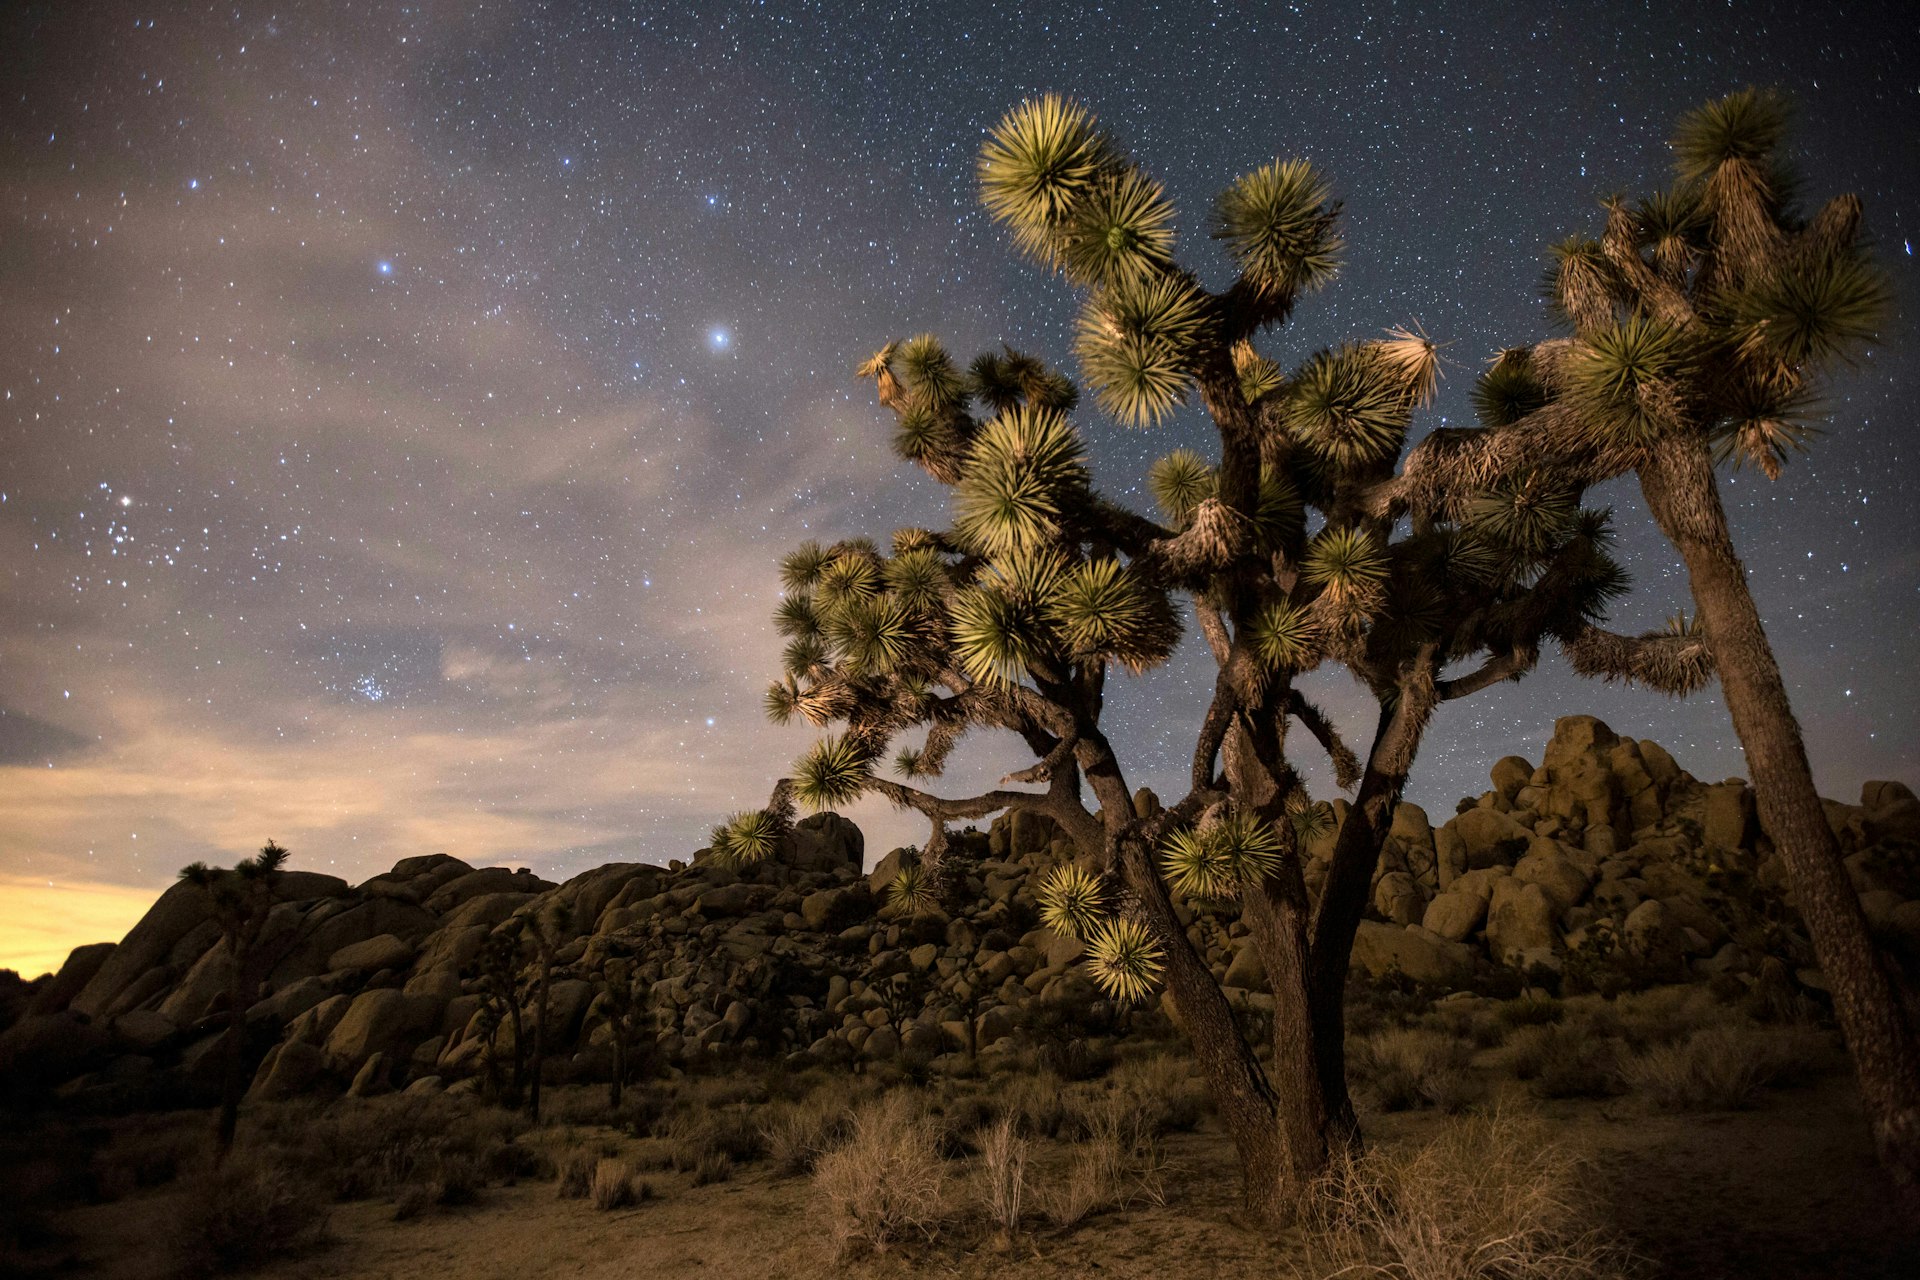 The strangely shaped Joshua Trees and the starry spectacle of the clear night sky make for awe-inspiring visits to Joshua Tree National Park © Brad Goldpaint / Getty Images